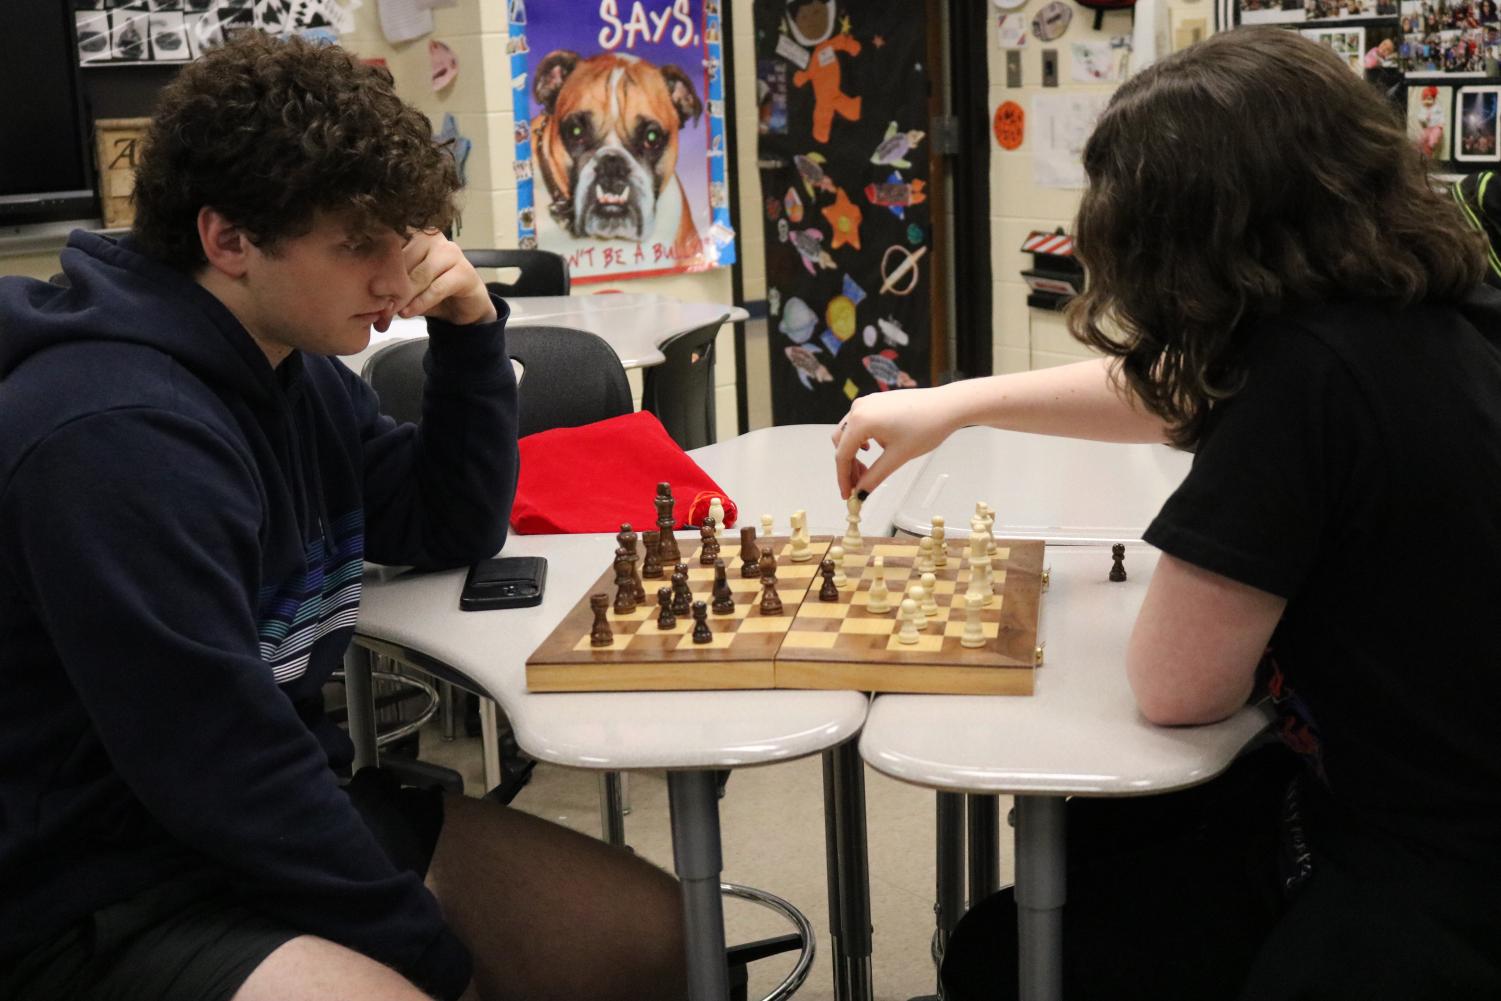 Cincinnati Chess Club - A Place Where Everyone is Welcome to Play